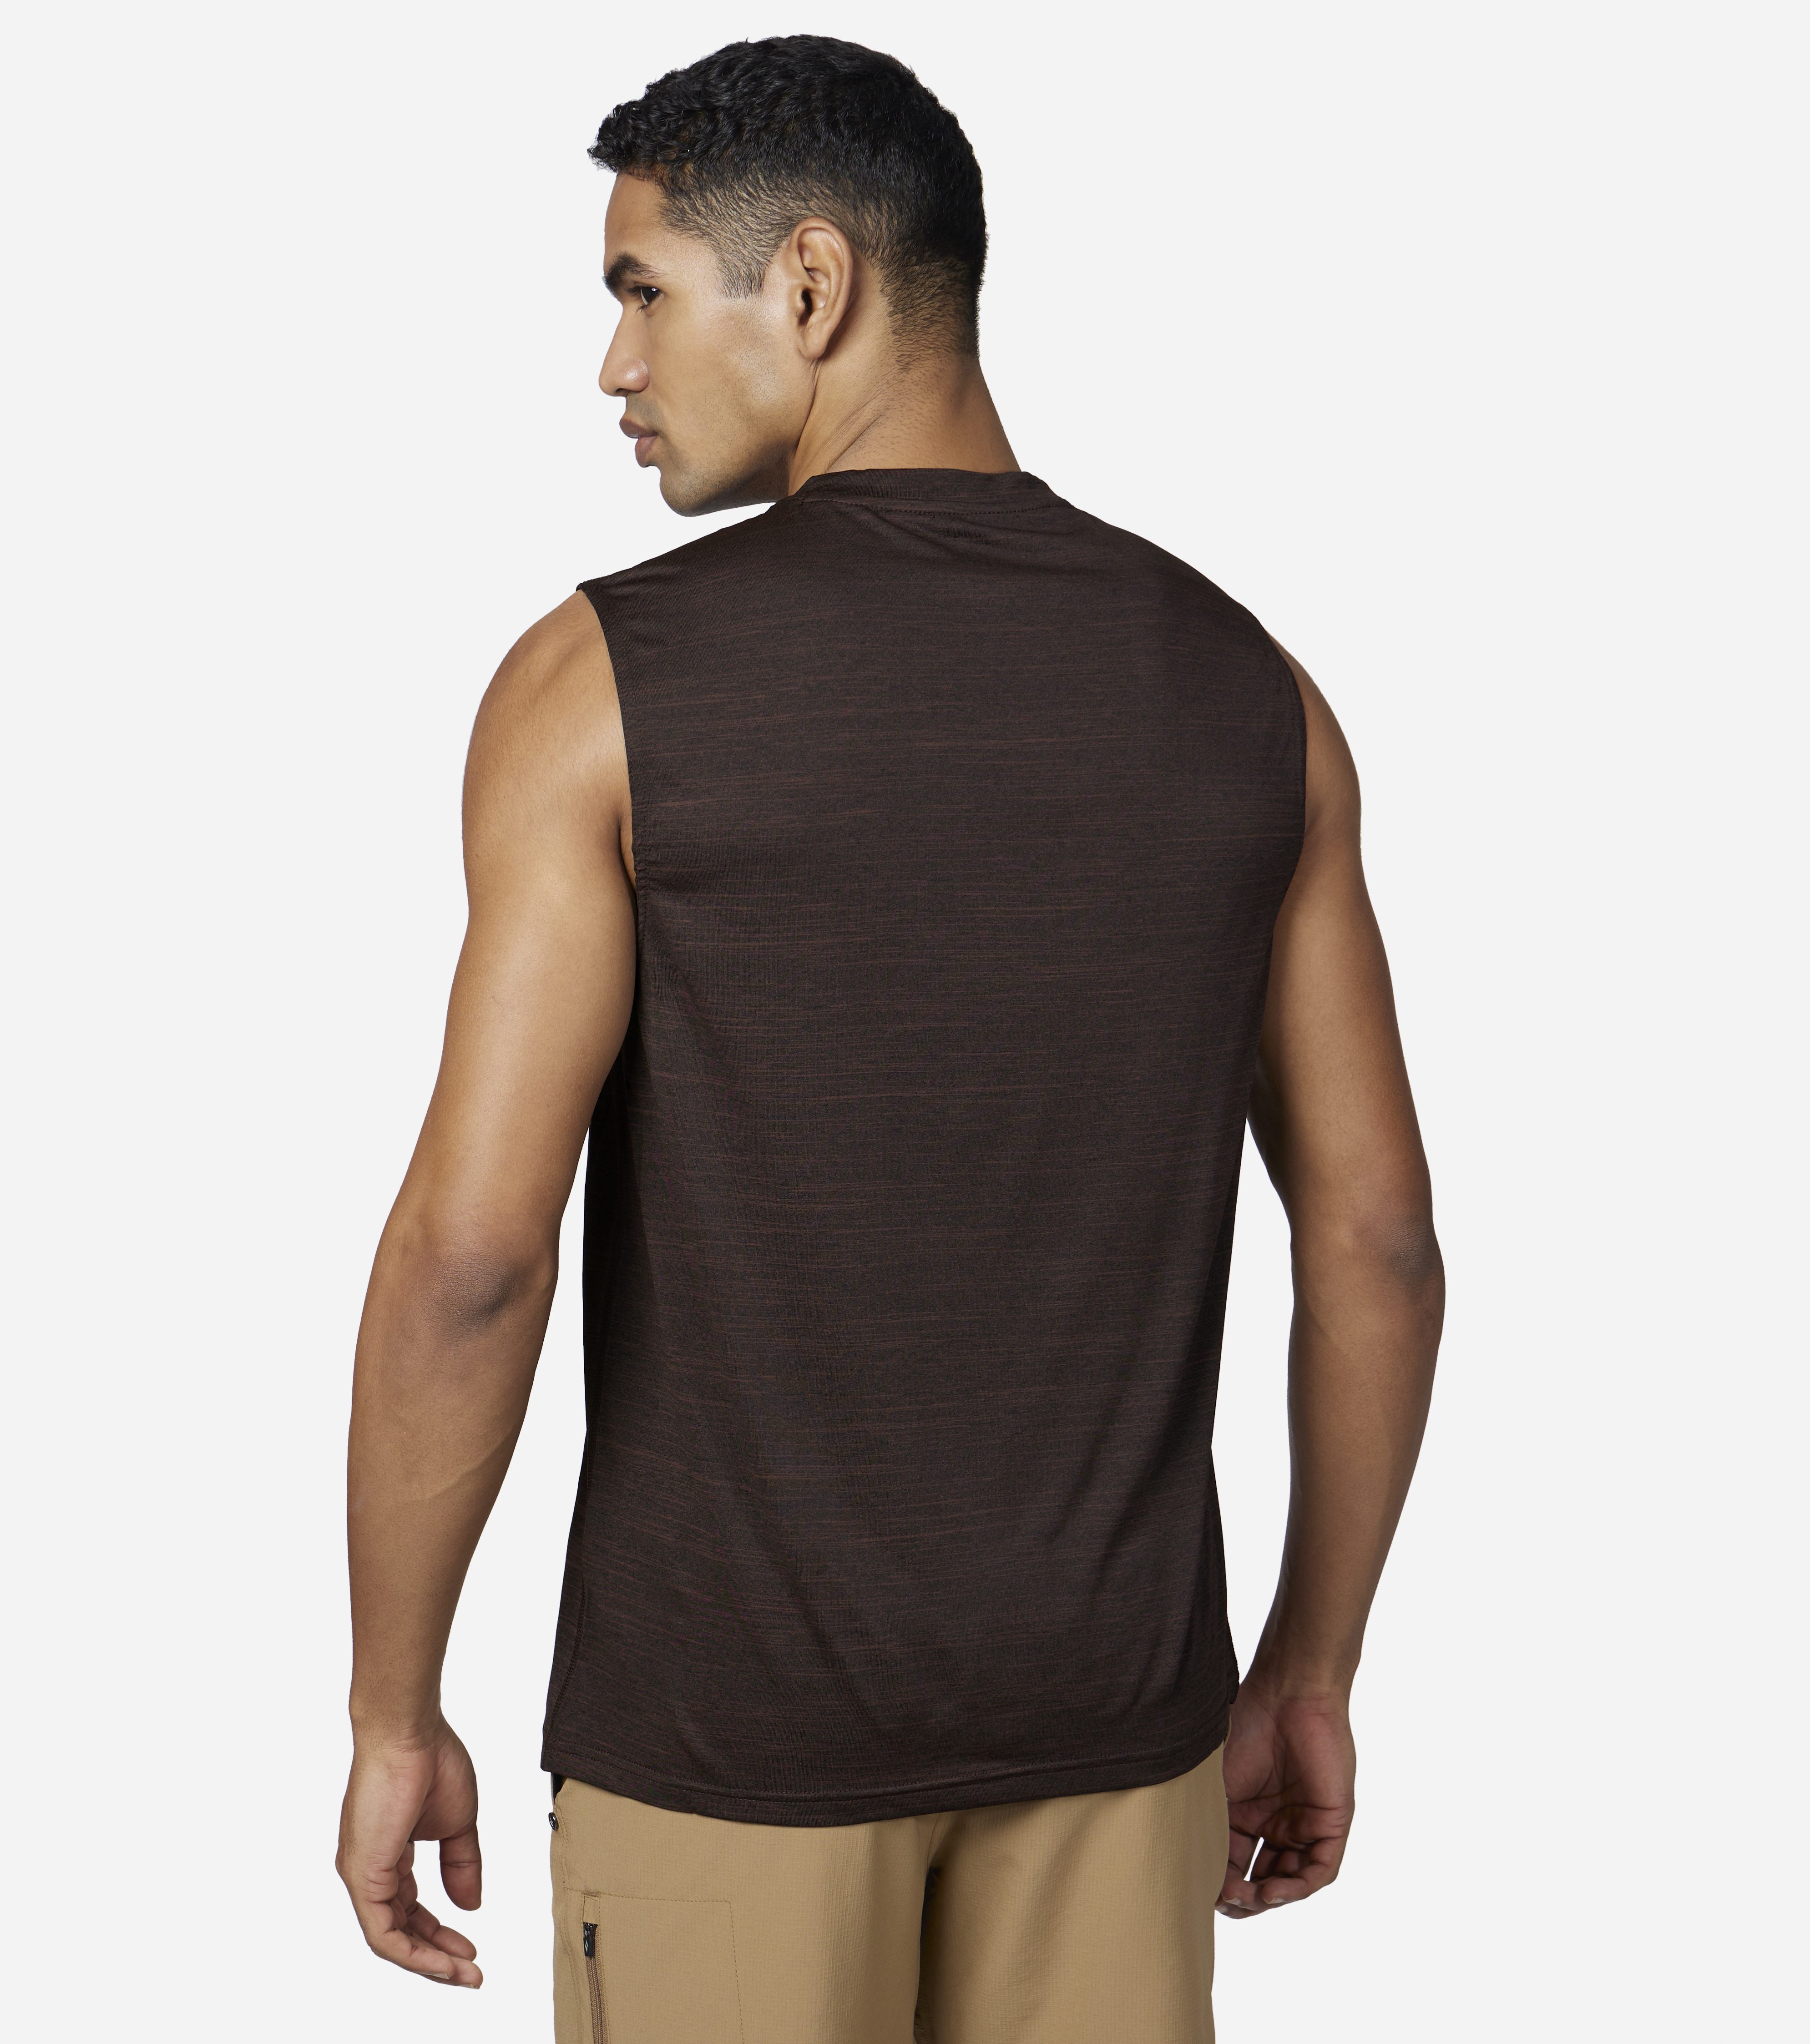 ON THE ROAD MUSCLE TANK, BURGUNDY Apparels Bottom View